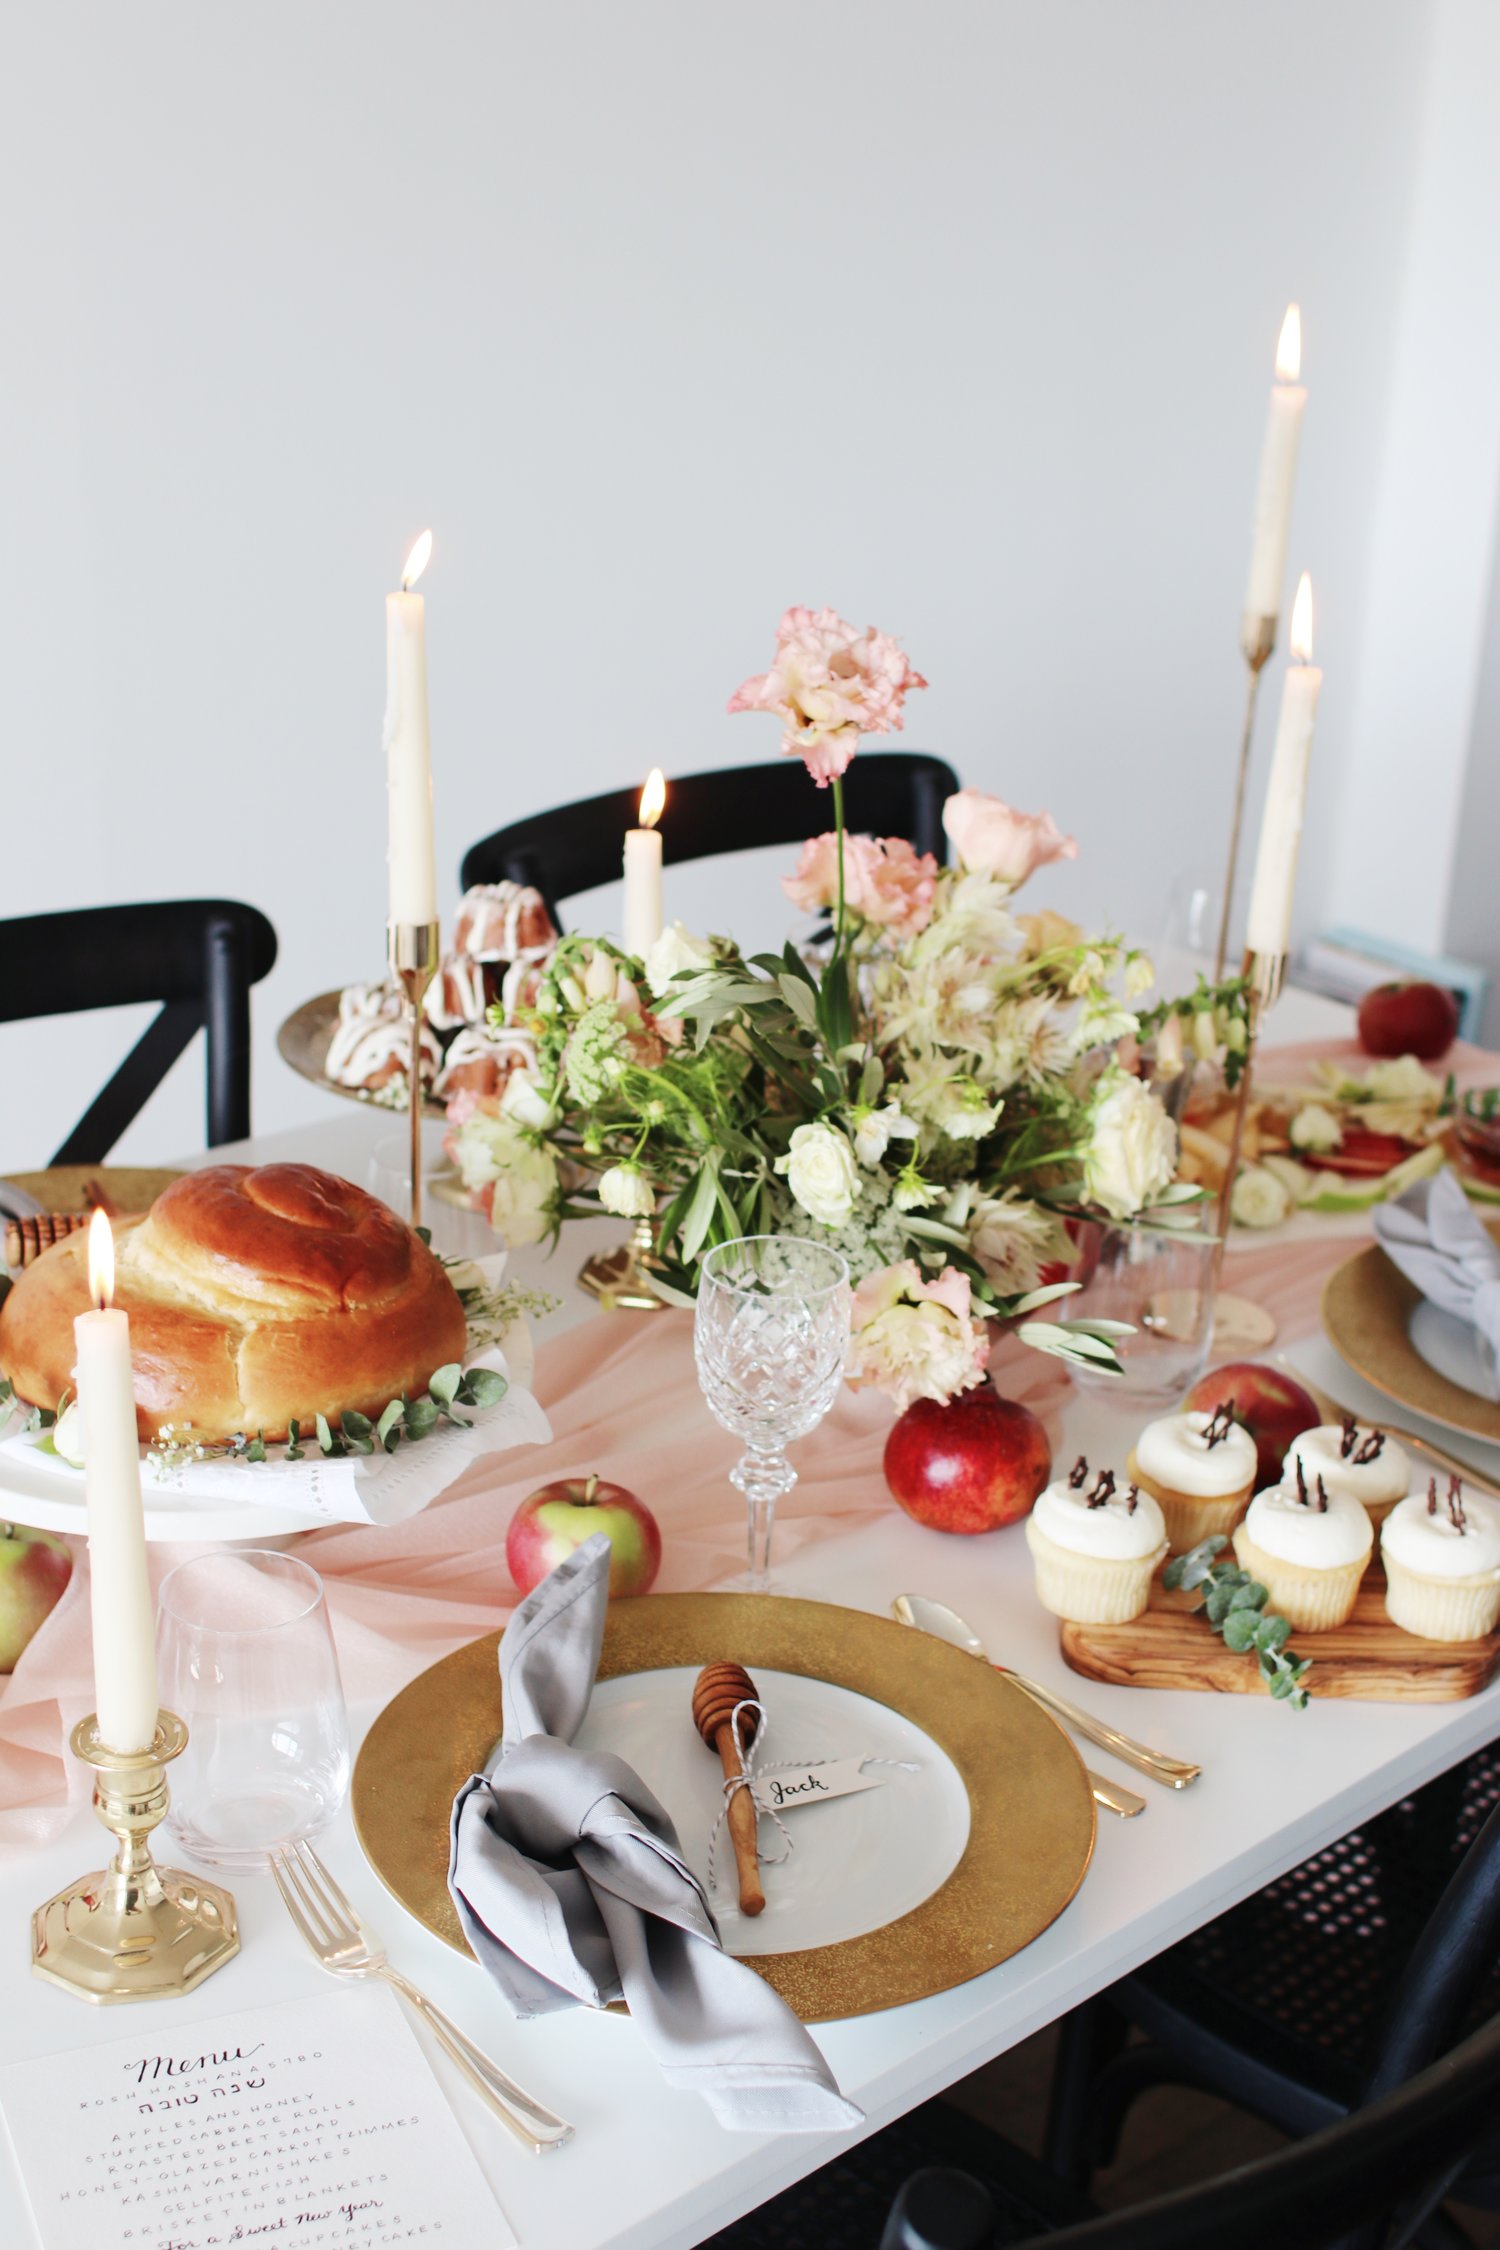 rebekah lowin rosh hashanah decorations and table setting ideas